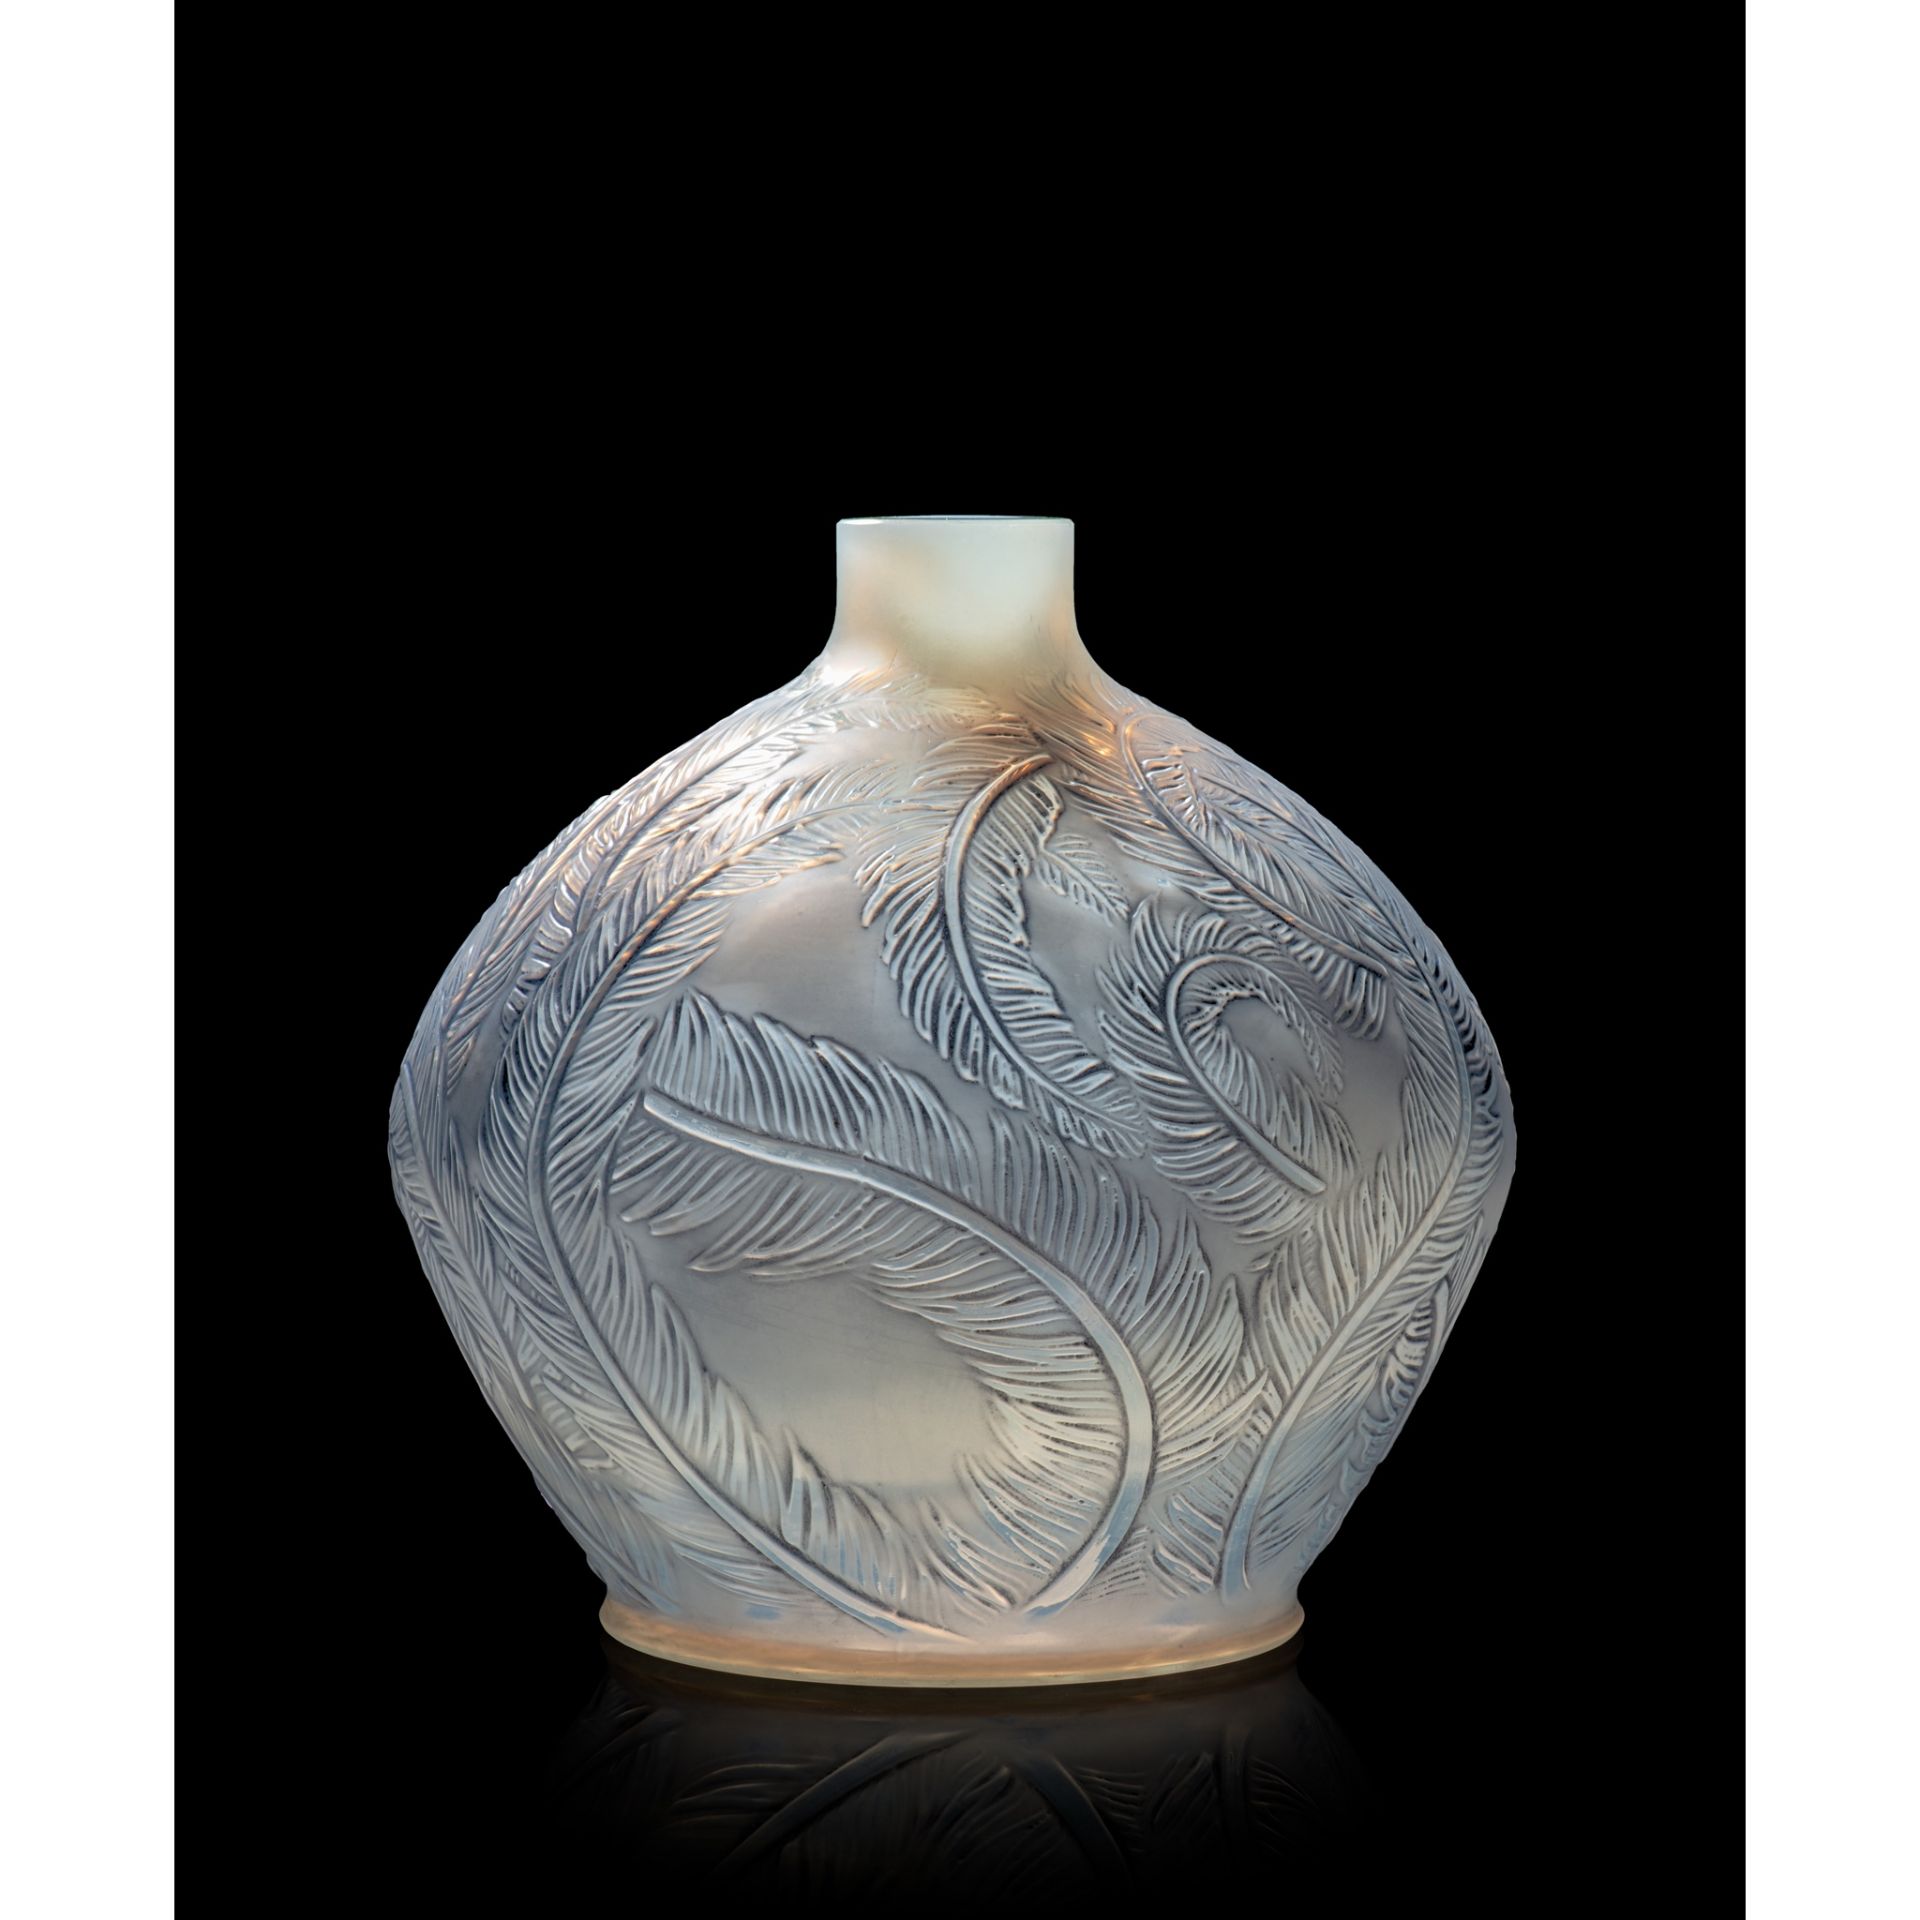 ‡ René Lalique (French 1860-1945) PLUMES VASE, NO. 944 - Image 2 of 2